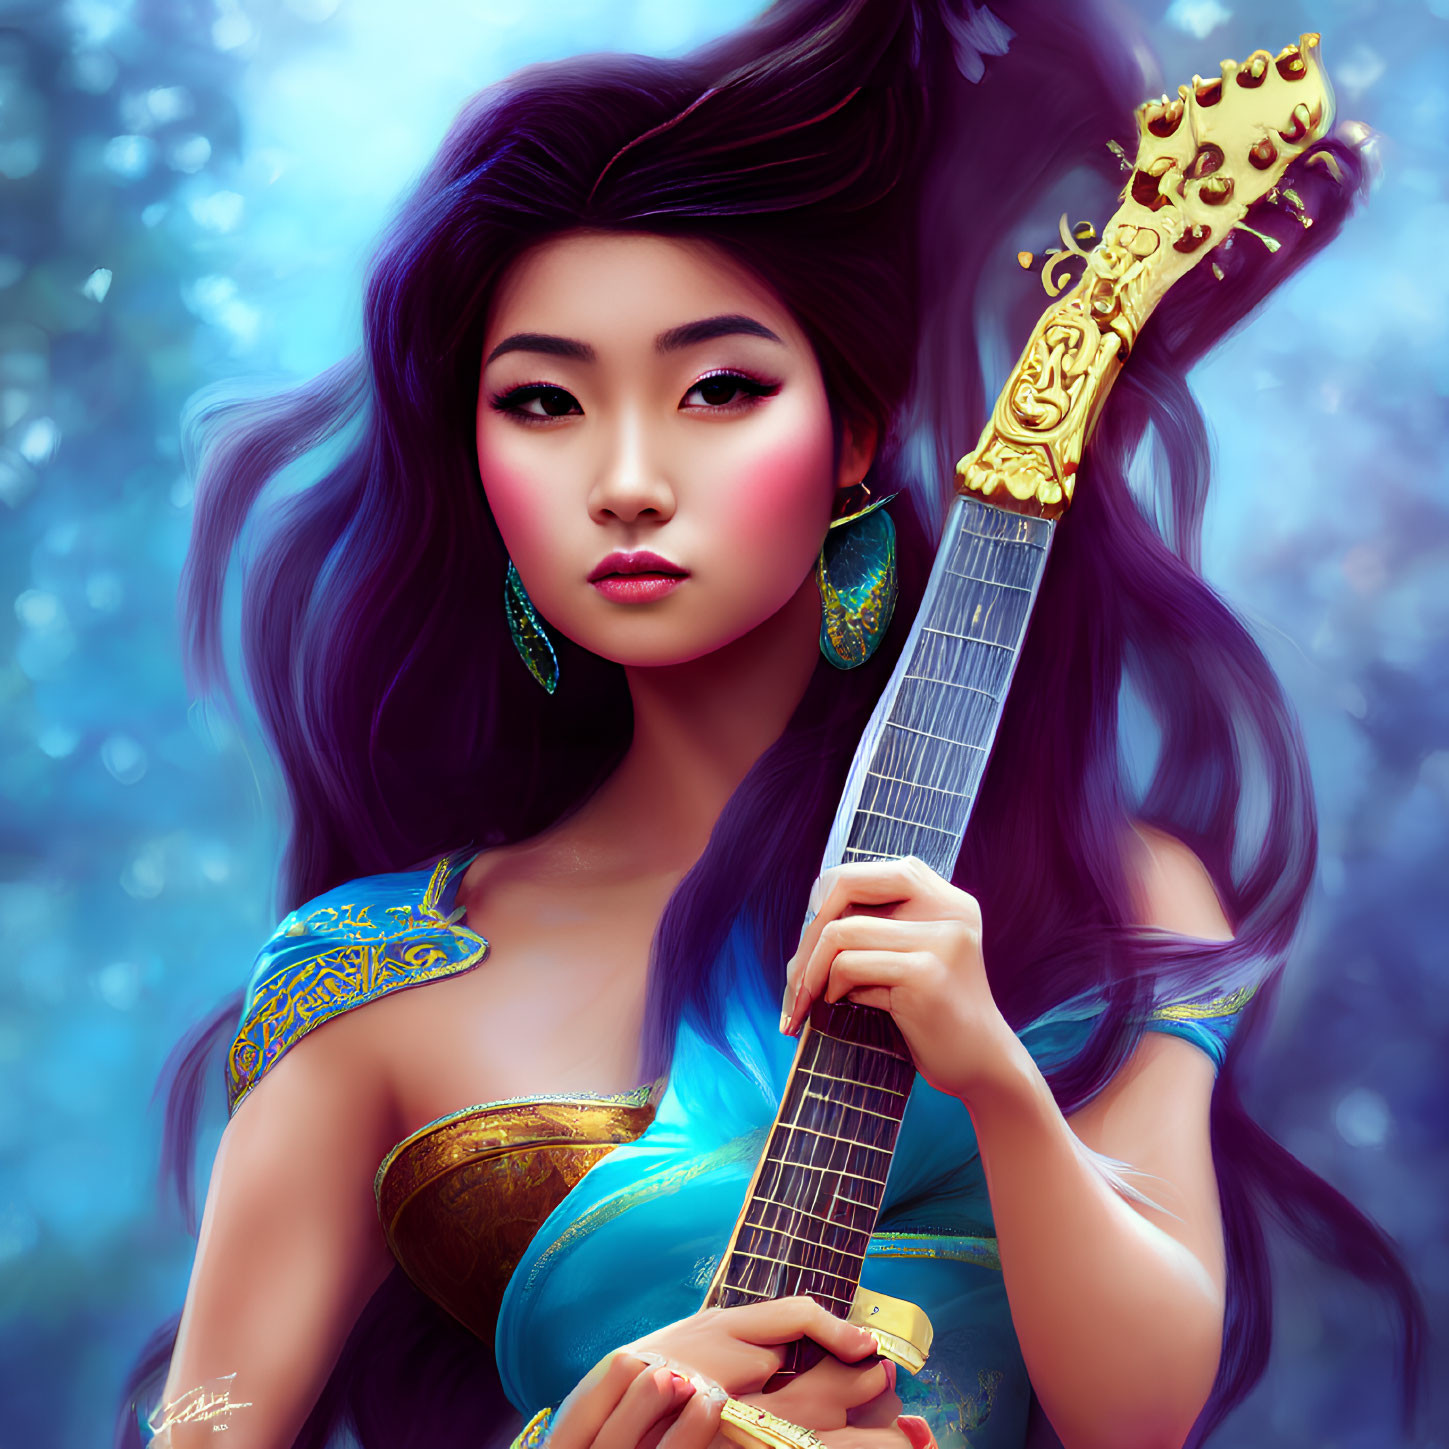 Illustrated woman with long hair holding guitar in magical forest landscape